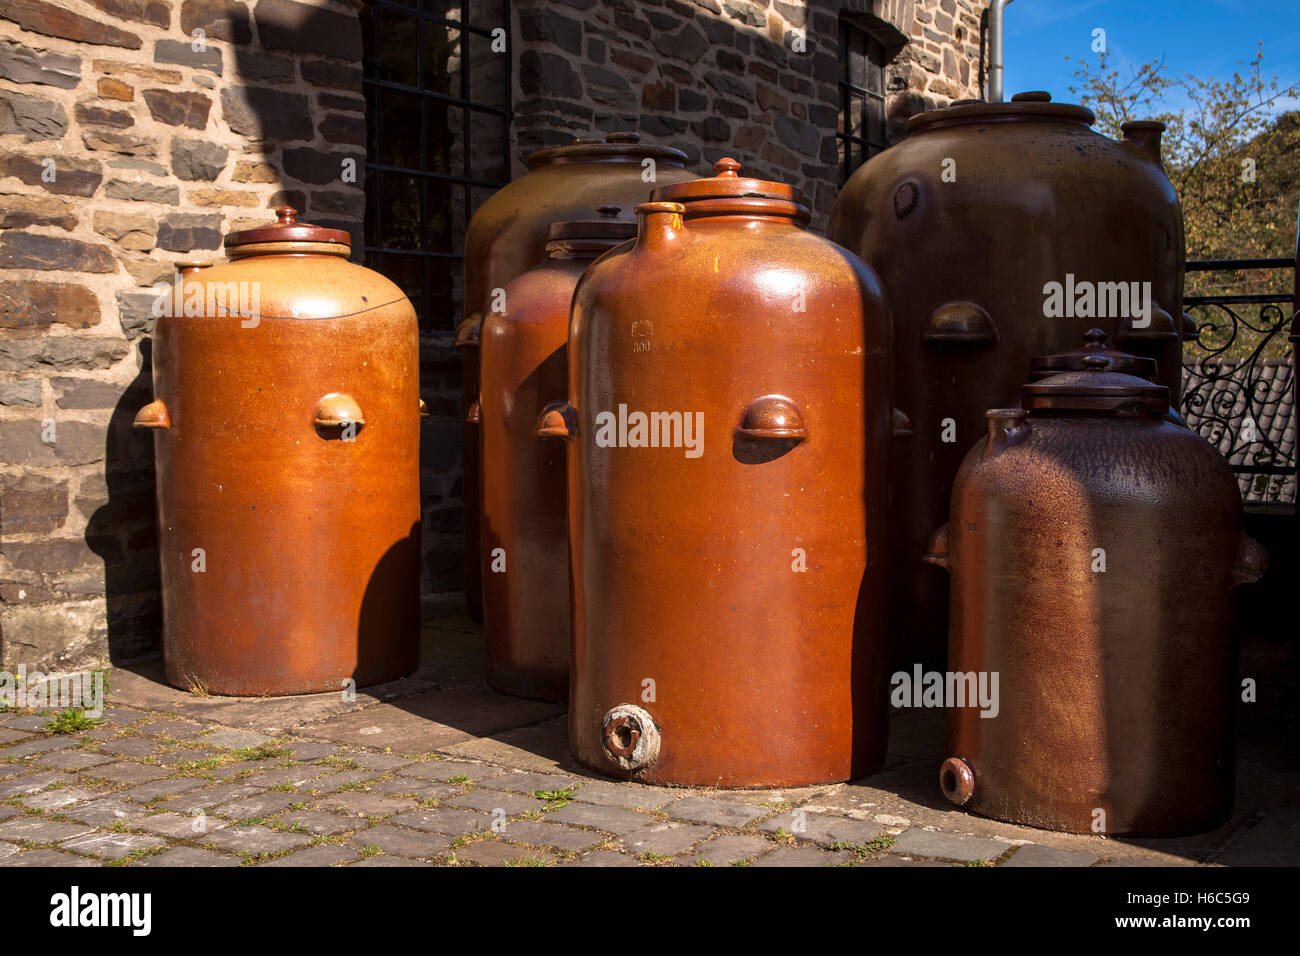 Germany, Hagen, Hagen Open-air Museum, large clay jugs in front of the old vinegar brewery and the mustard mill. Stock Photo